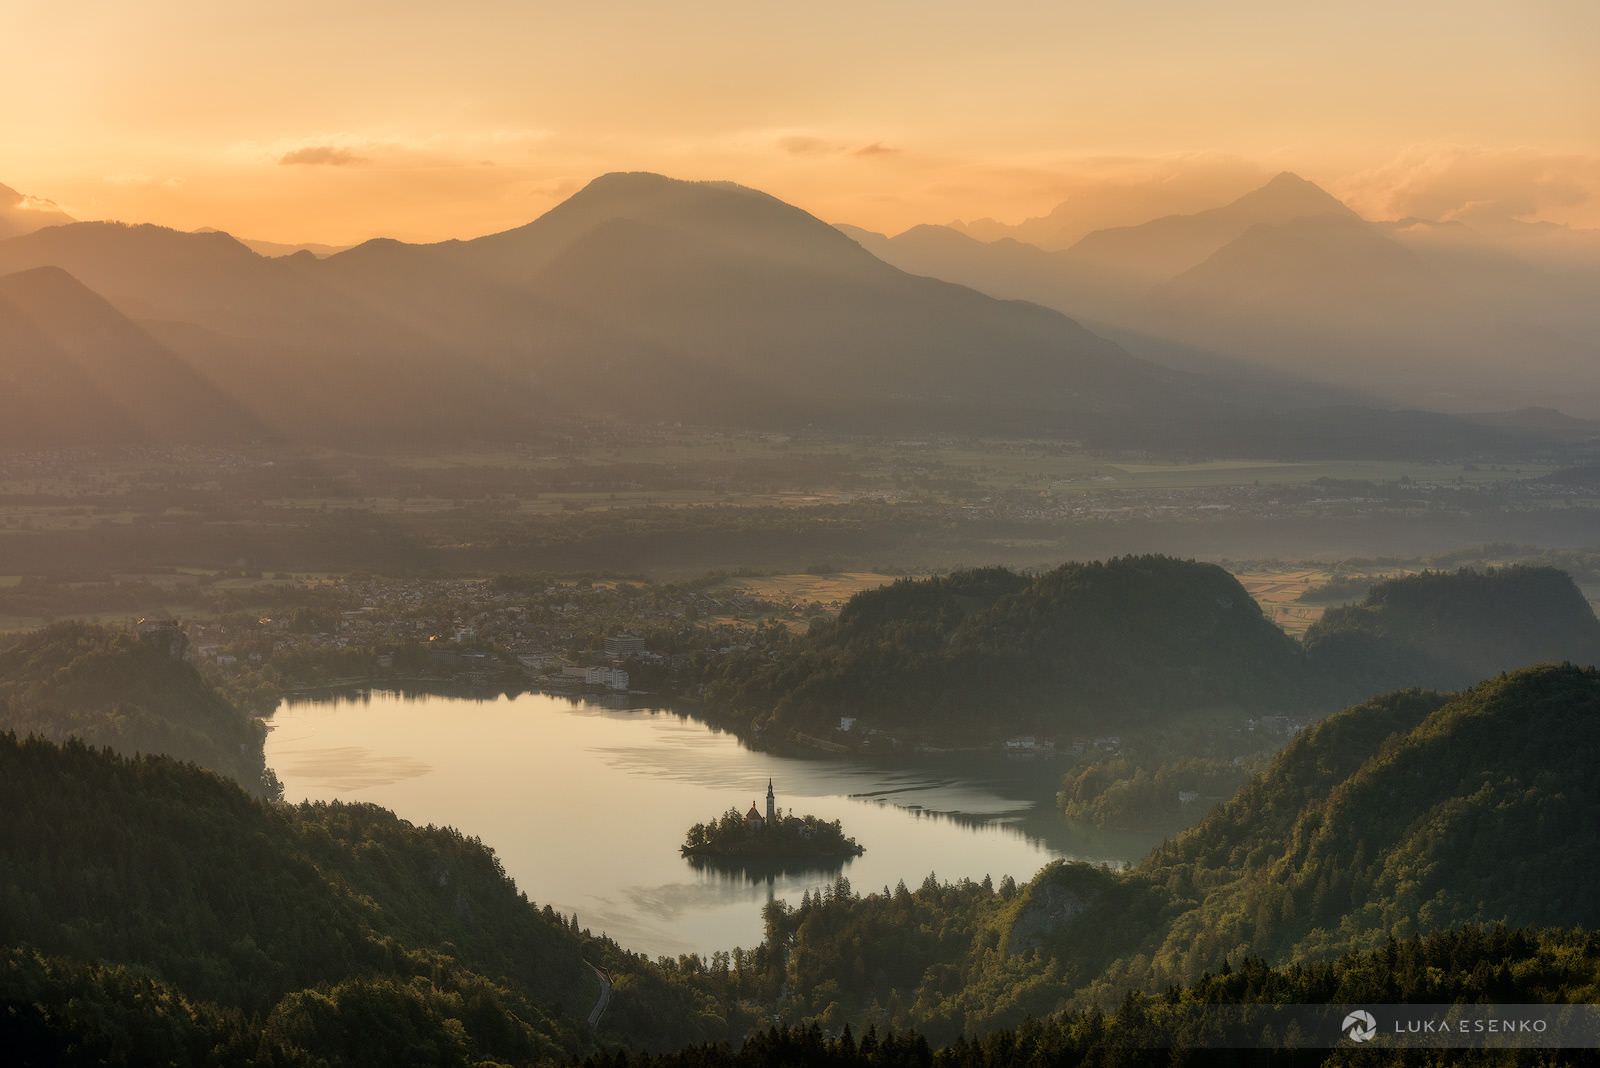 How to Photograph Lake Bled